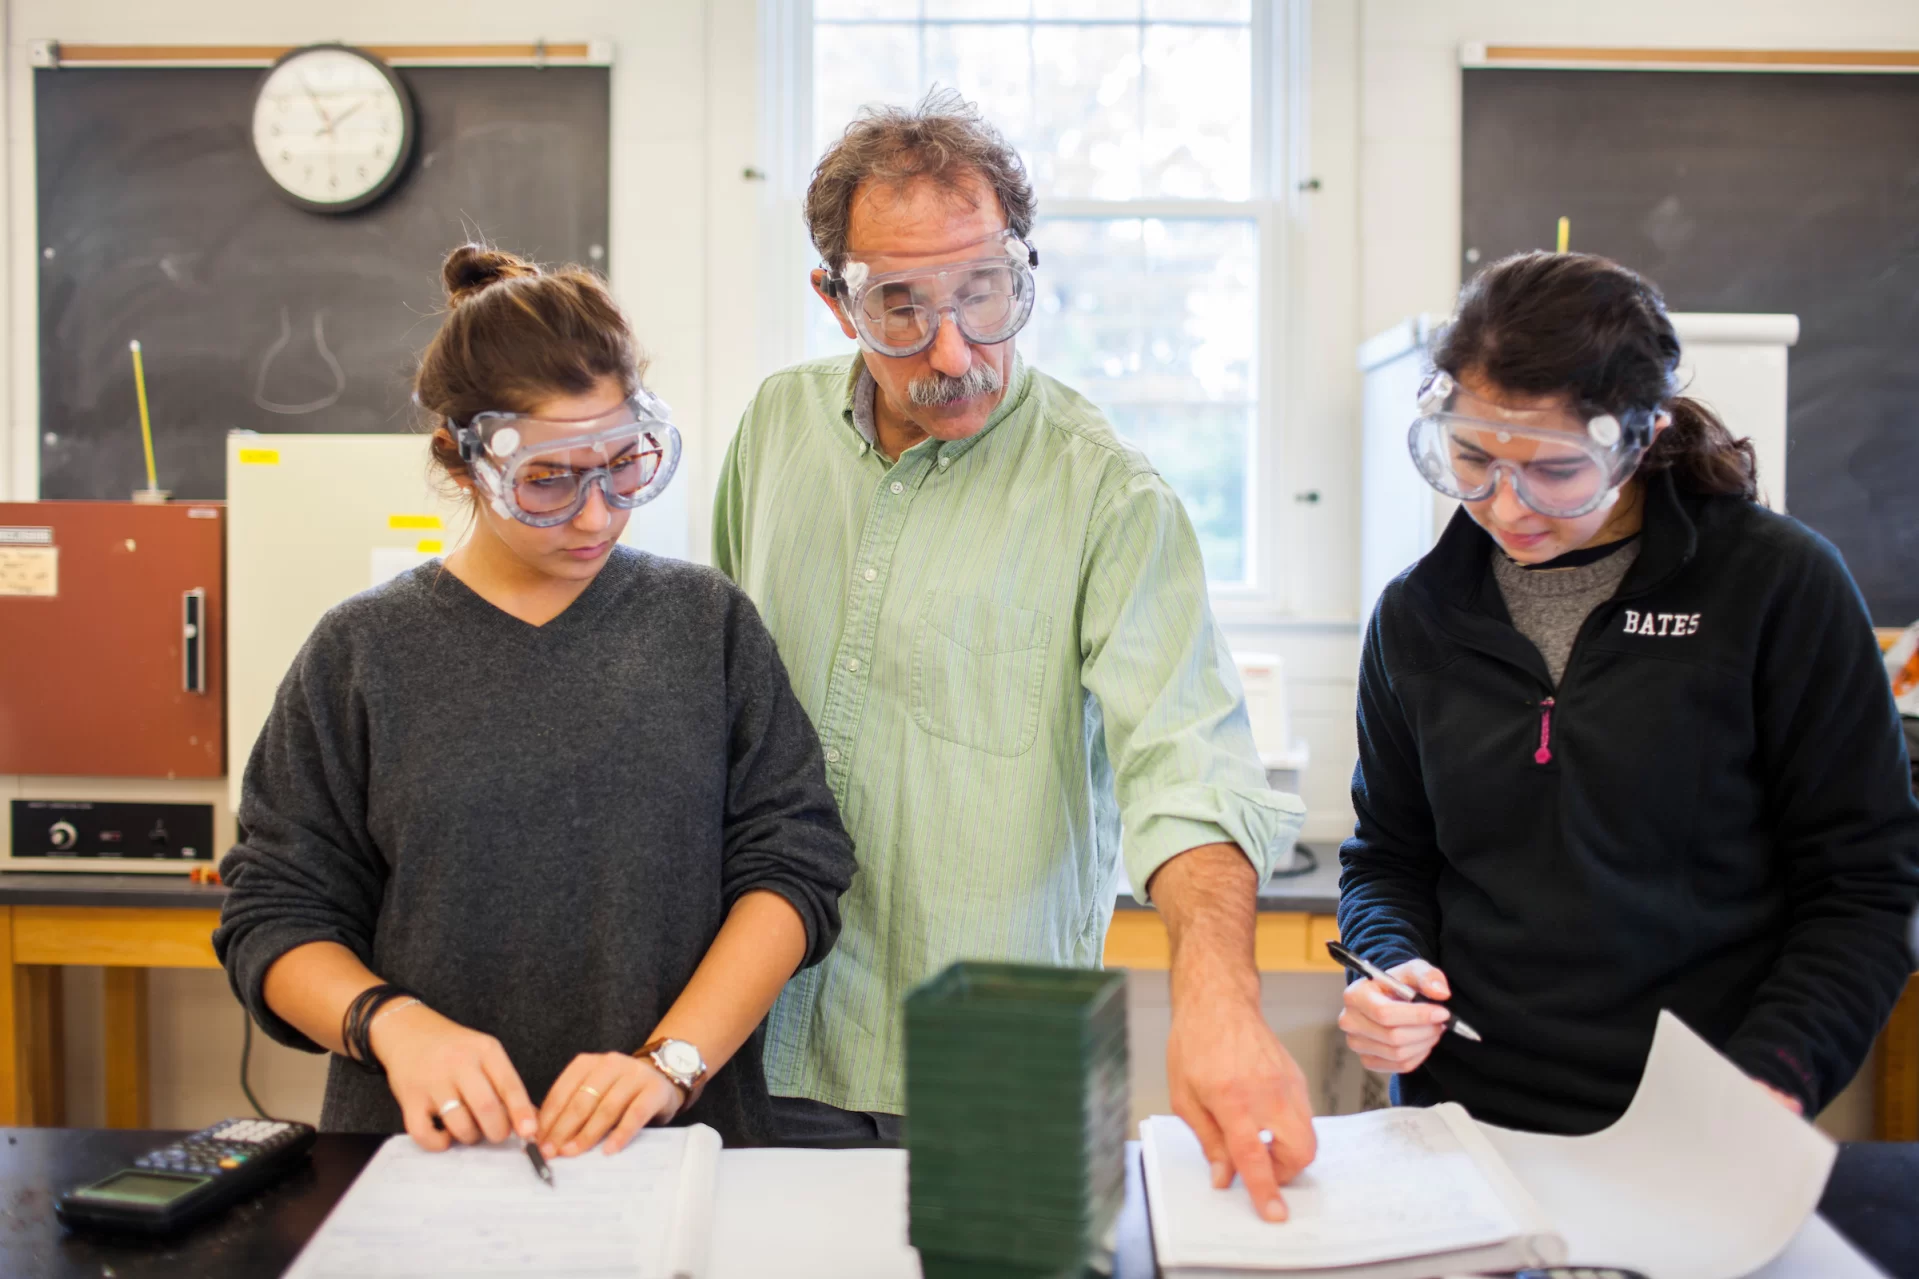 Legendary Bates chemistry professor Tom Wenzel named one of the top science educators of the past 10 years